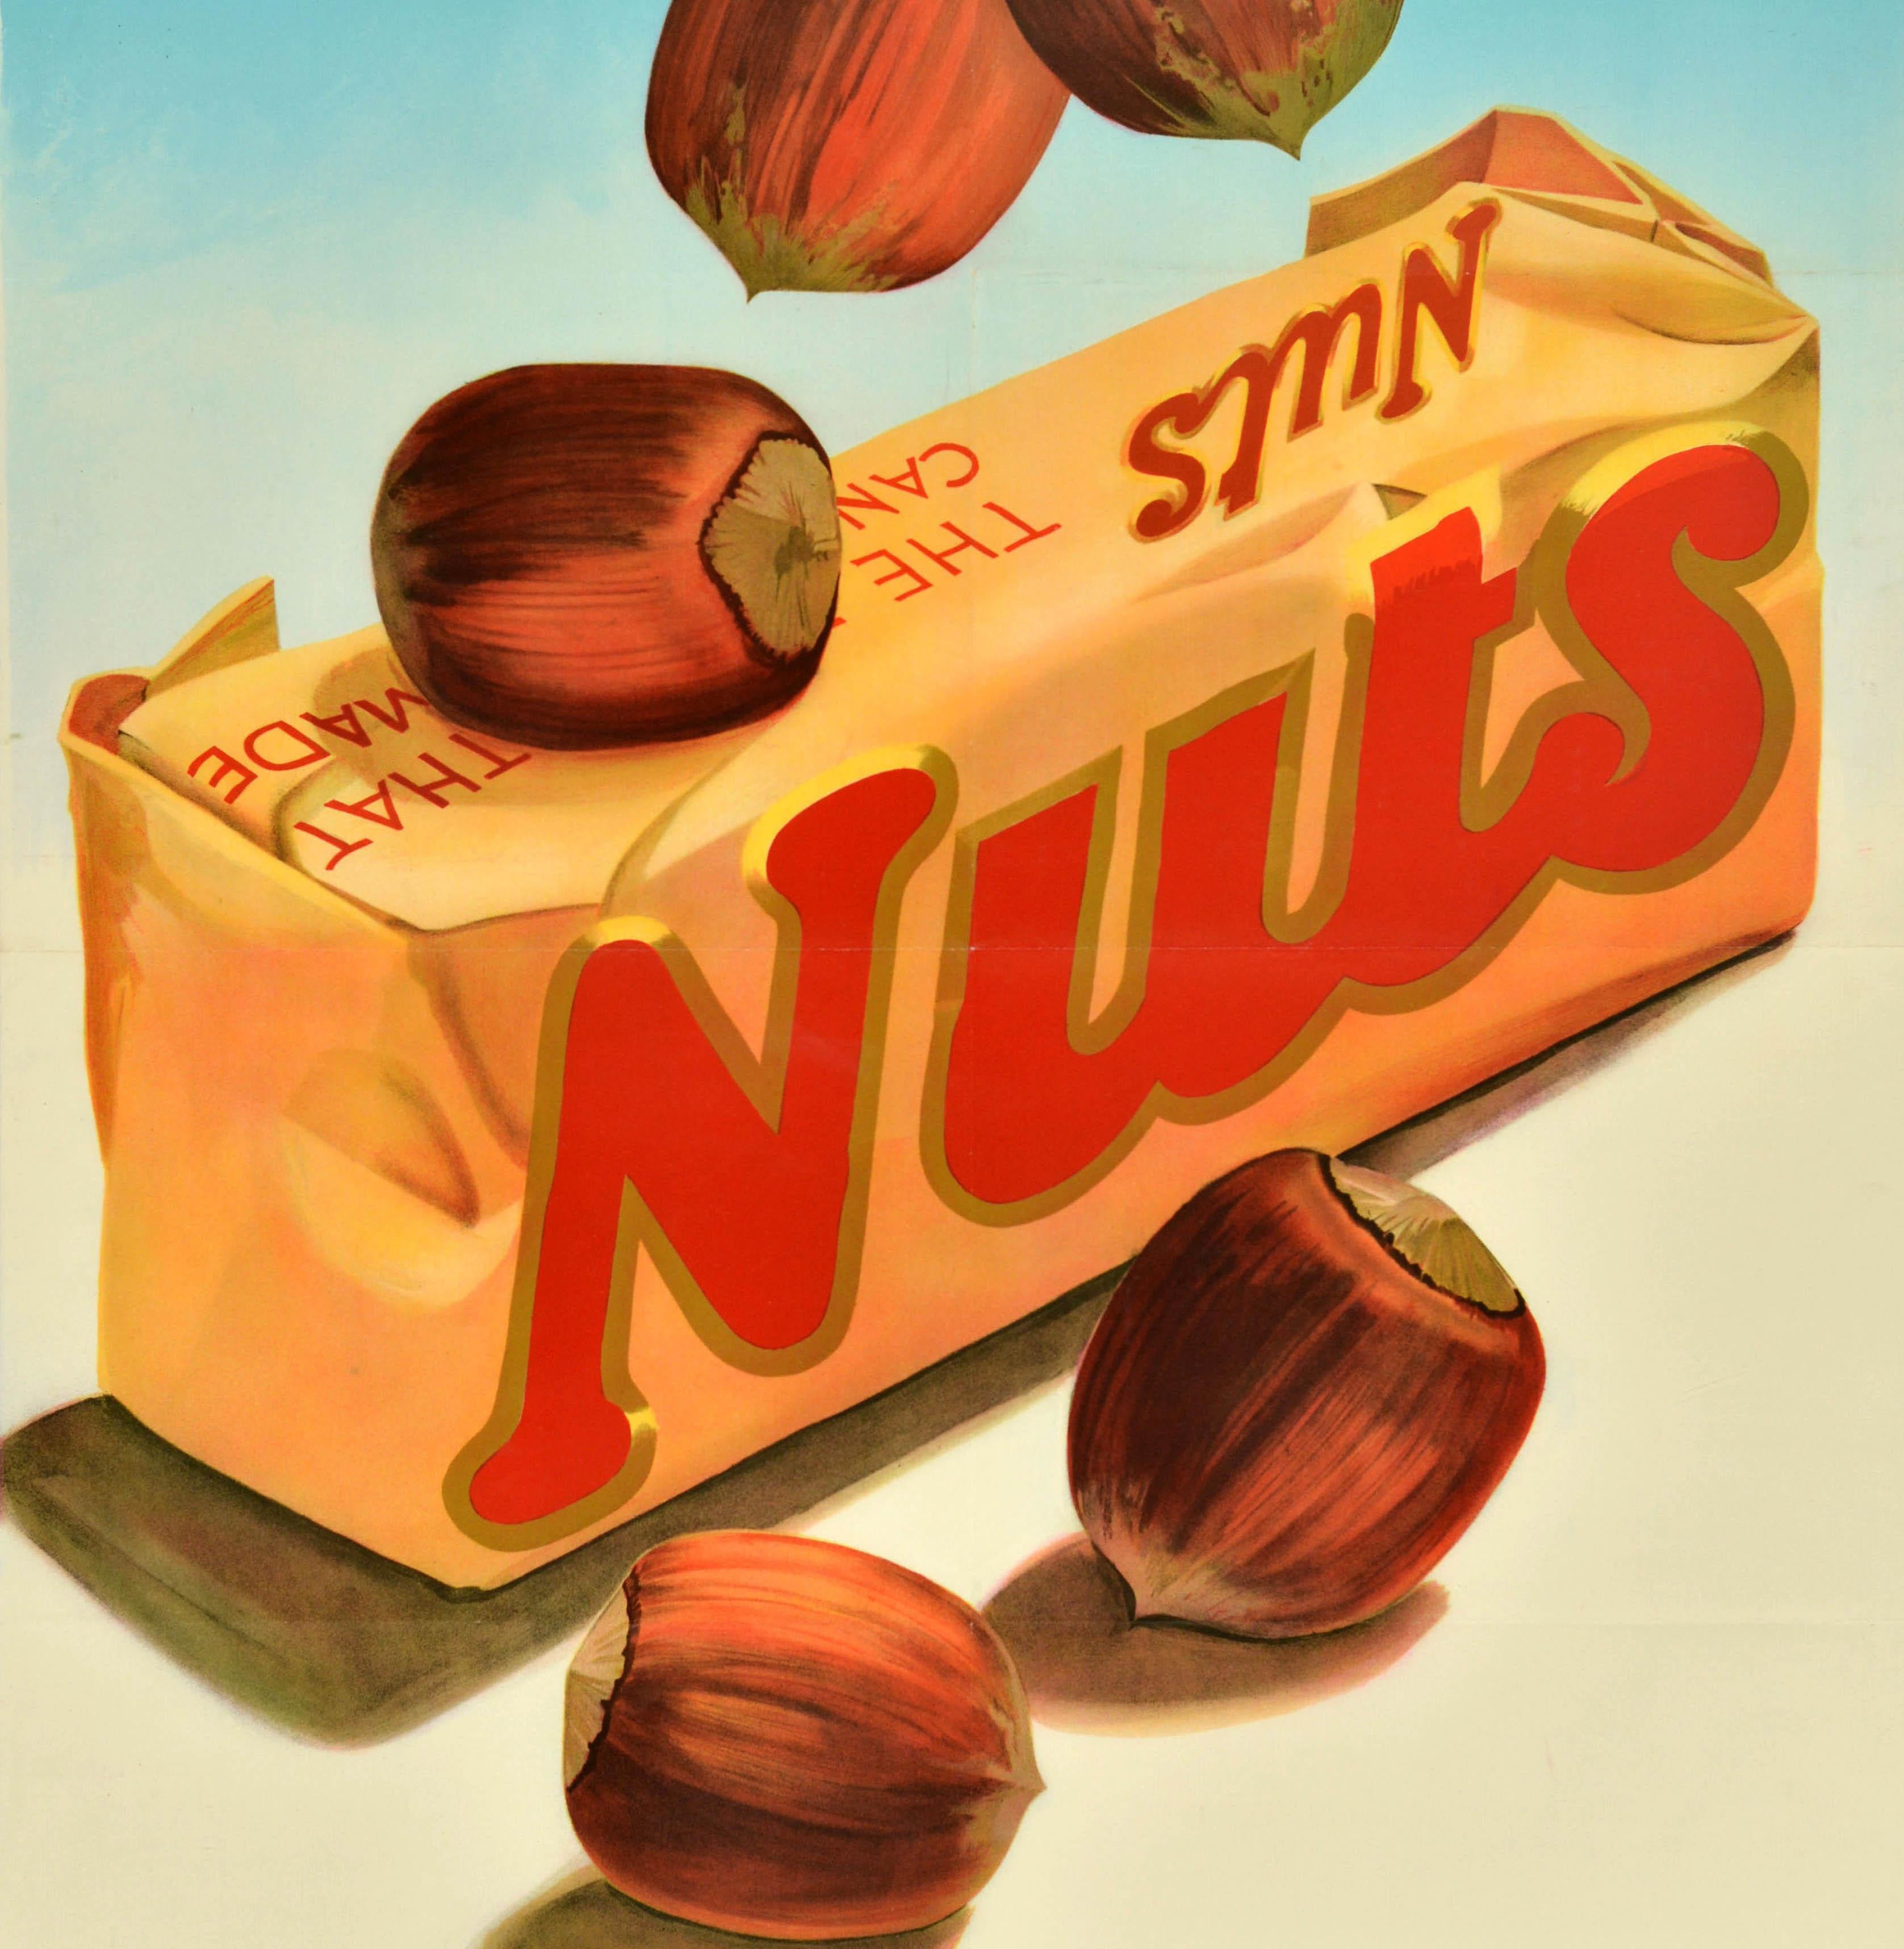 Original vintage food advertising poster for Nuts featuring an illustration by the Dutch artist Frans Mettes (1909-1984) depicting hazelnuts falling on a golden sweet wrapper set on a light blue and white background, the slogan below - un produit